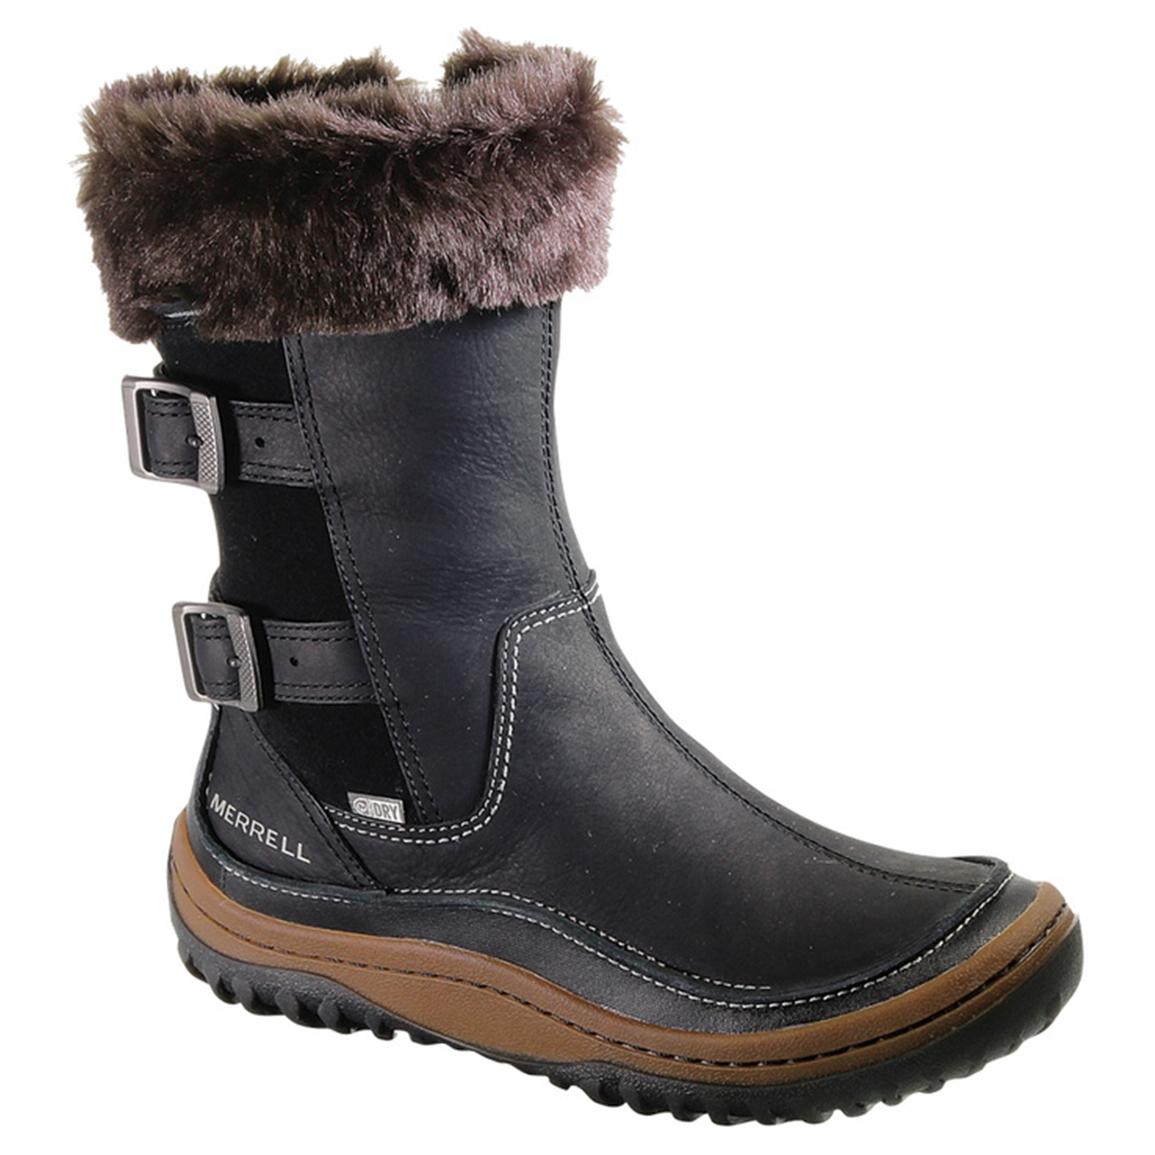 Waterproof Snow Boots For Women On Sale - Boot Ri